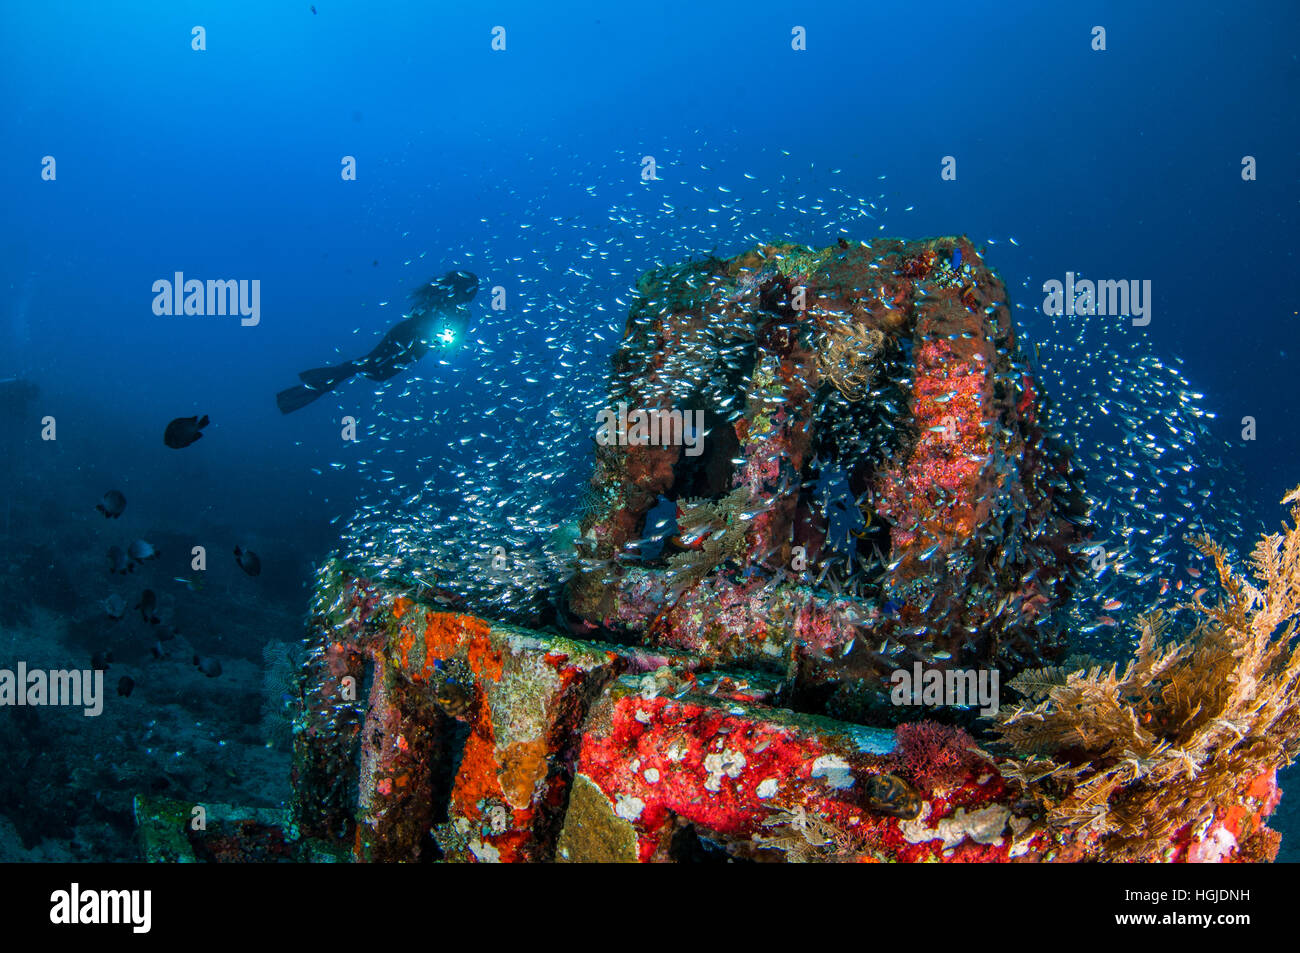 Wideangle coral reef view with diver, Bali, Indonesia Stock Photo